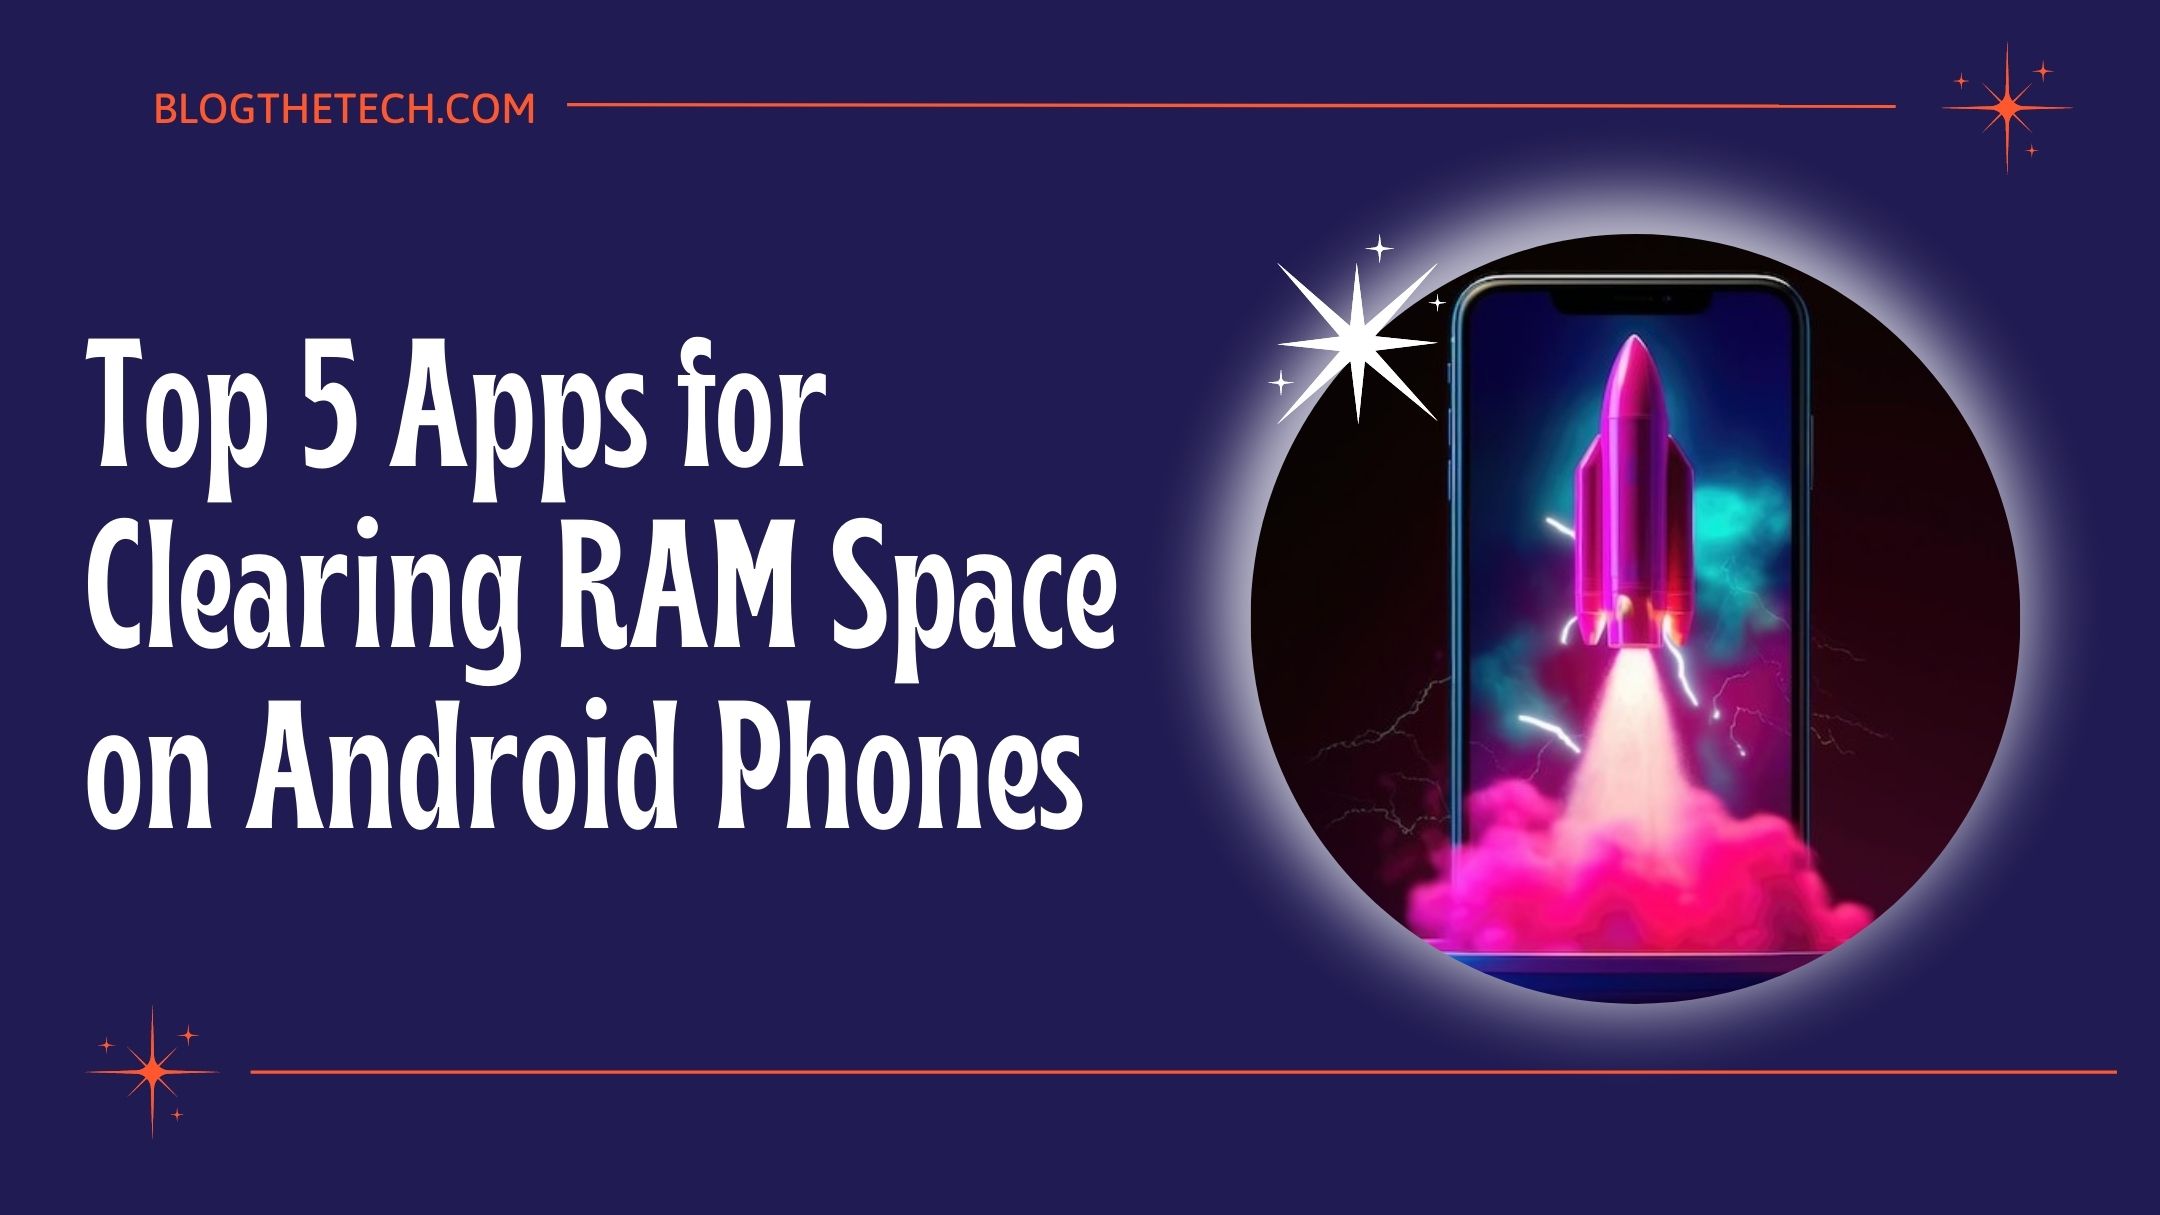 5-apps-for-clearing-ram-space-on-android-phones-featured